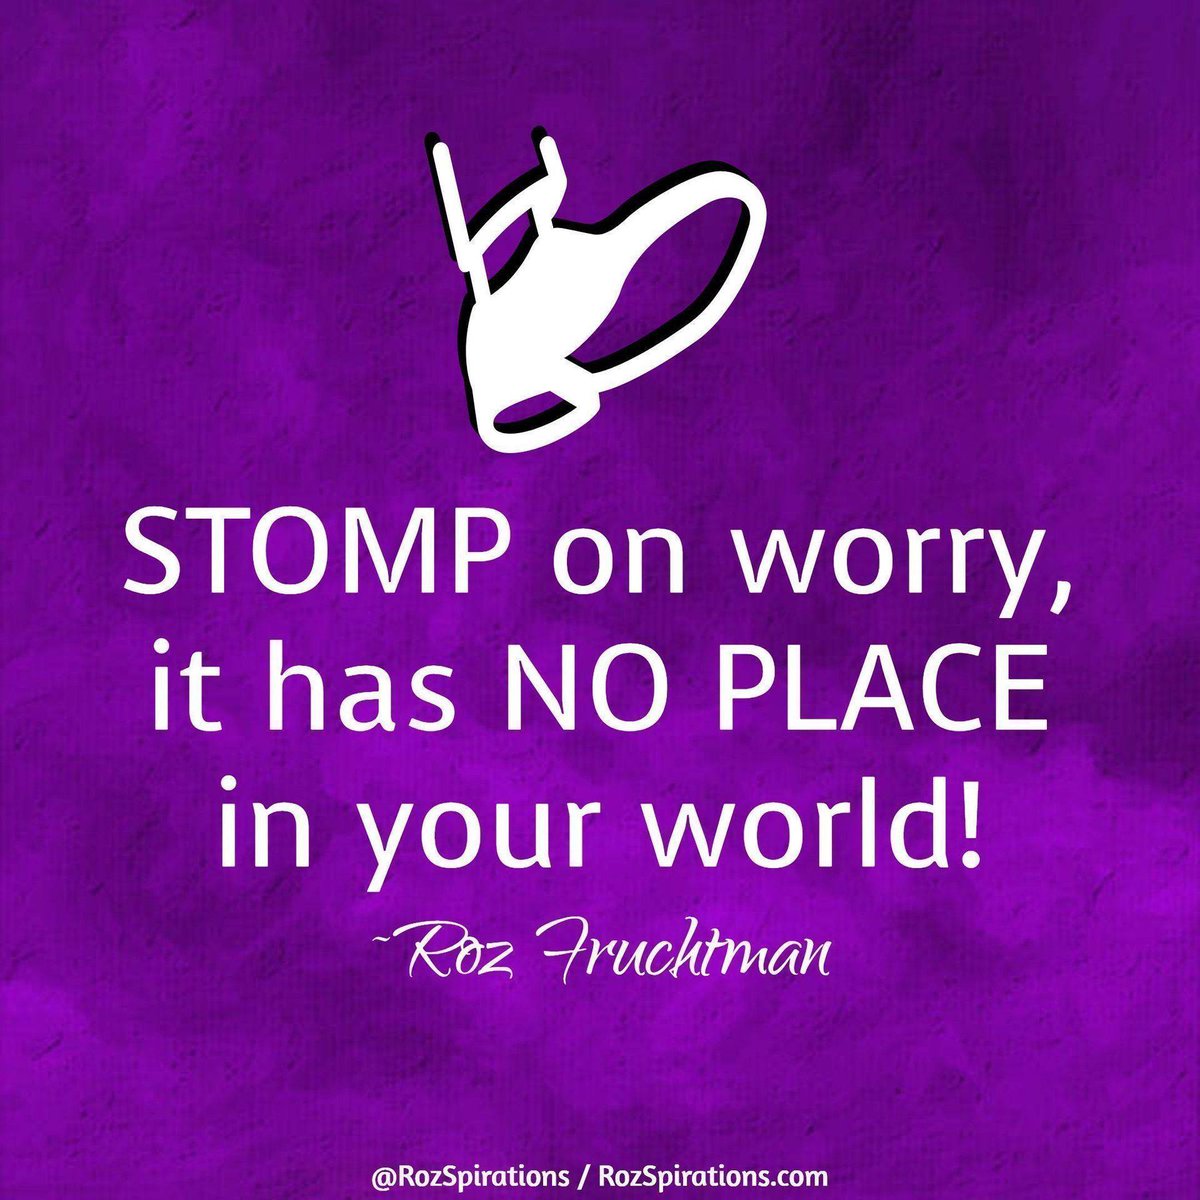 STOMP on worry, it has NO PLACE in your world! ~Roz Fruchtman #RozSpirations #InspirationalInfluencer #LoveTrain #JoyTrain #SuccessTrain #qotd #quote #quotes